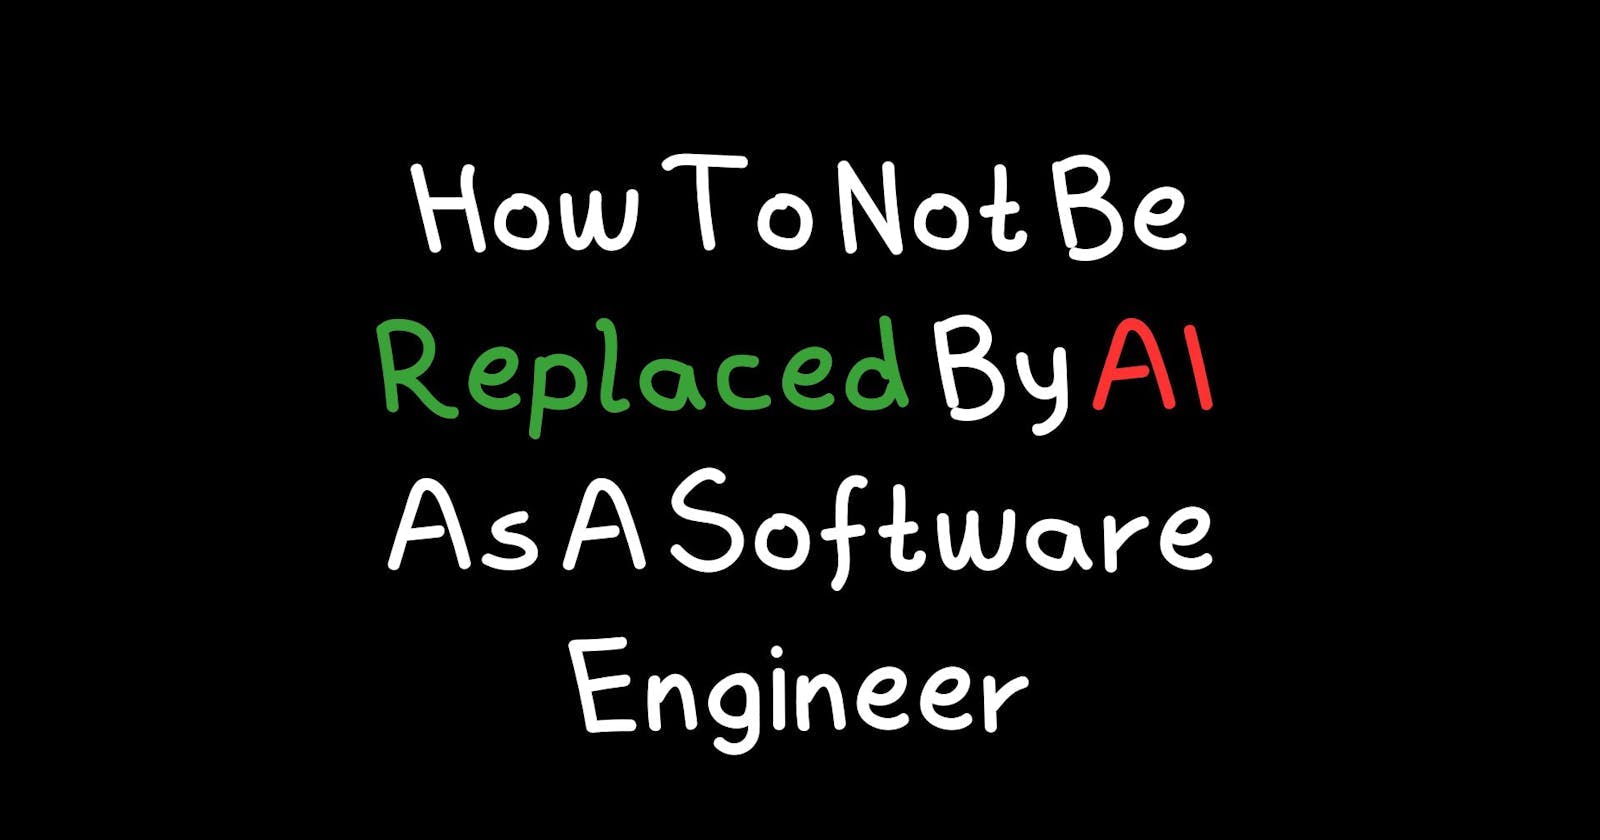 How To Not Be Replaced By AI As A Software Engineer